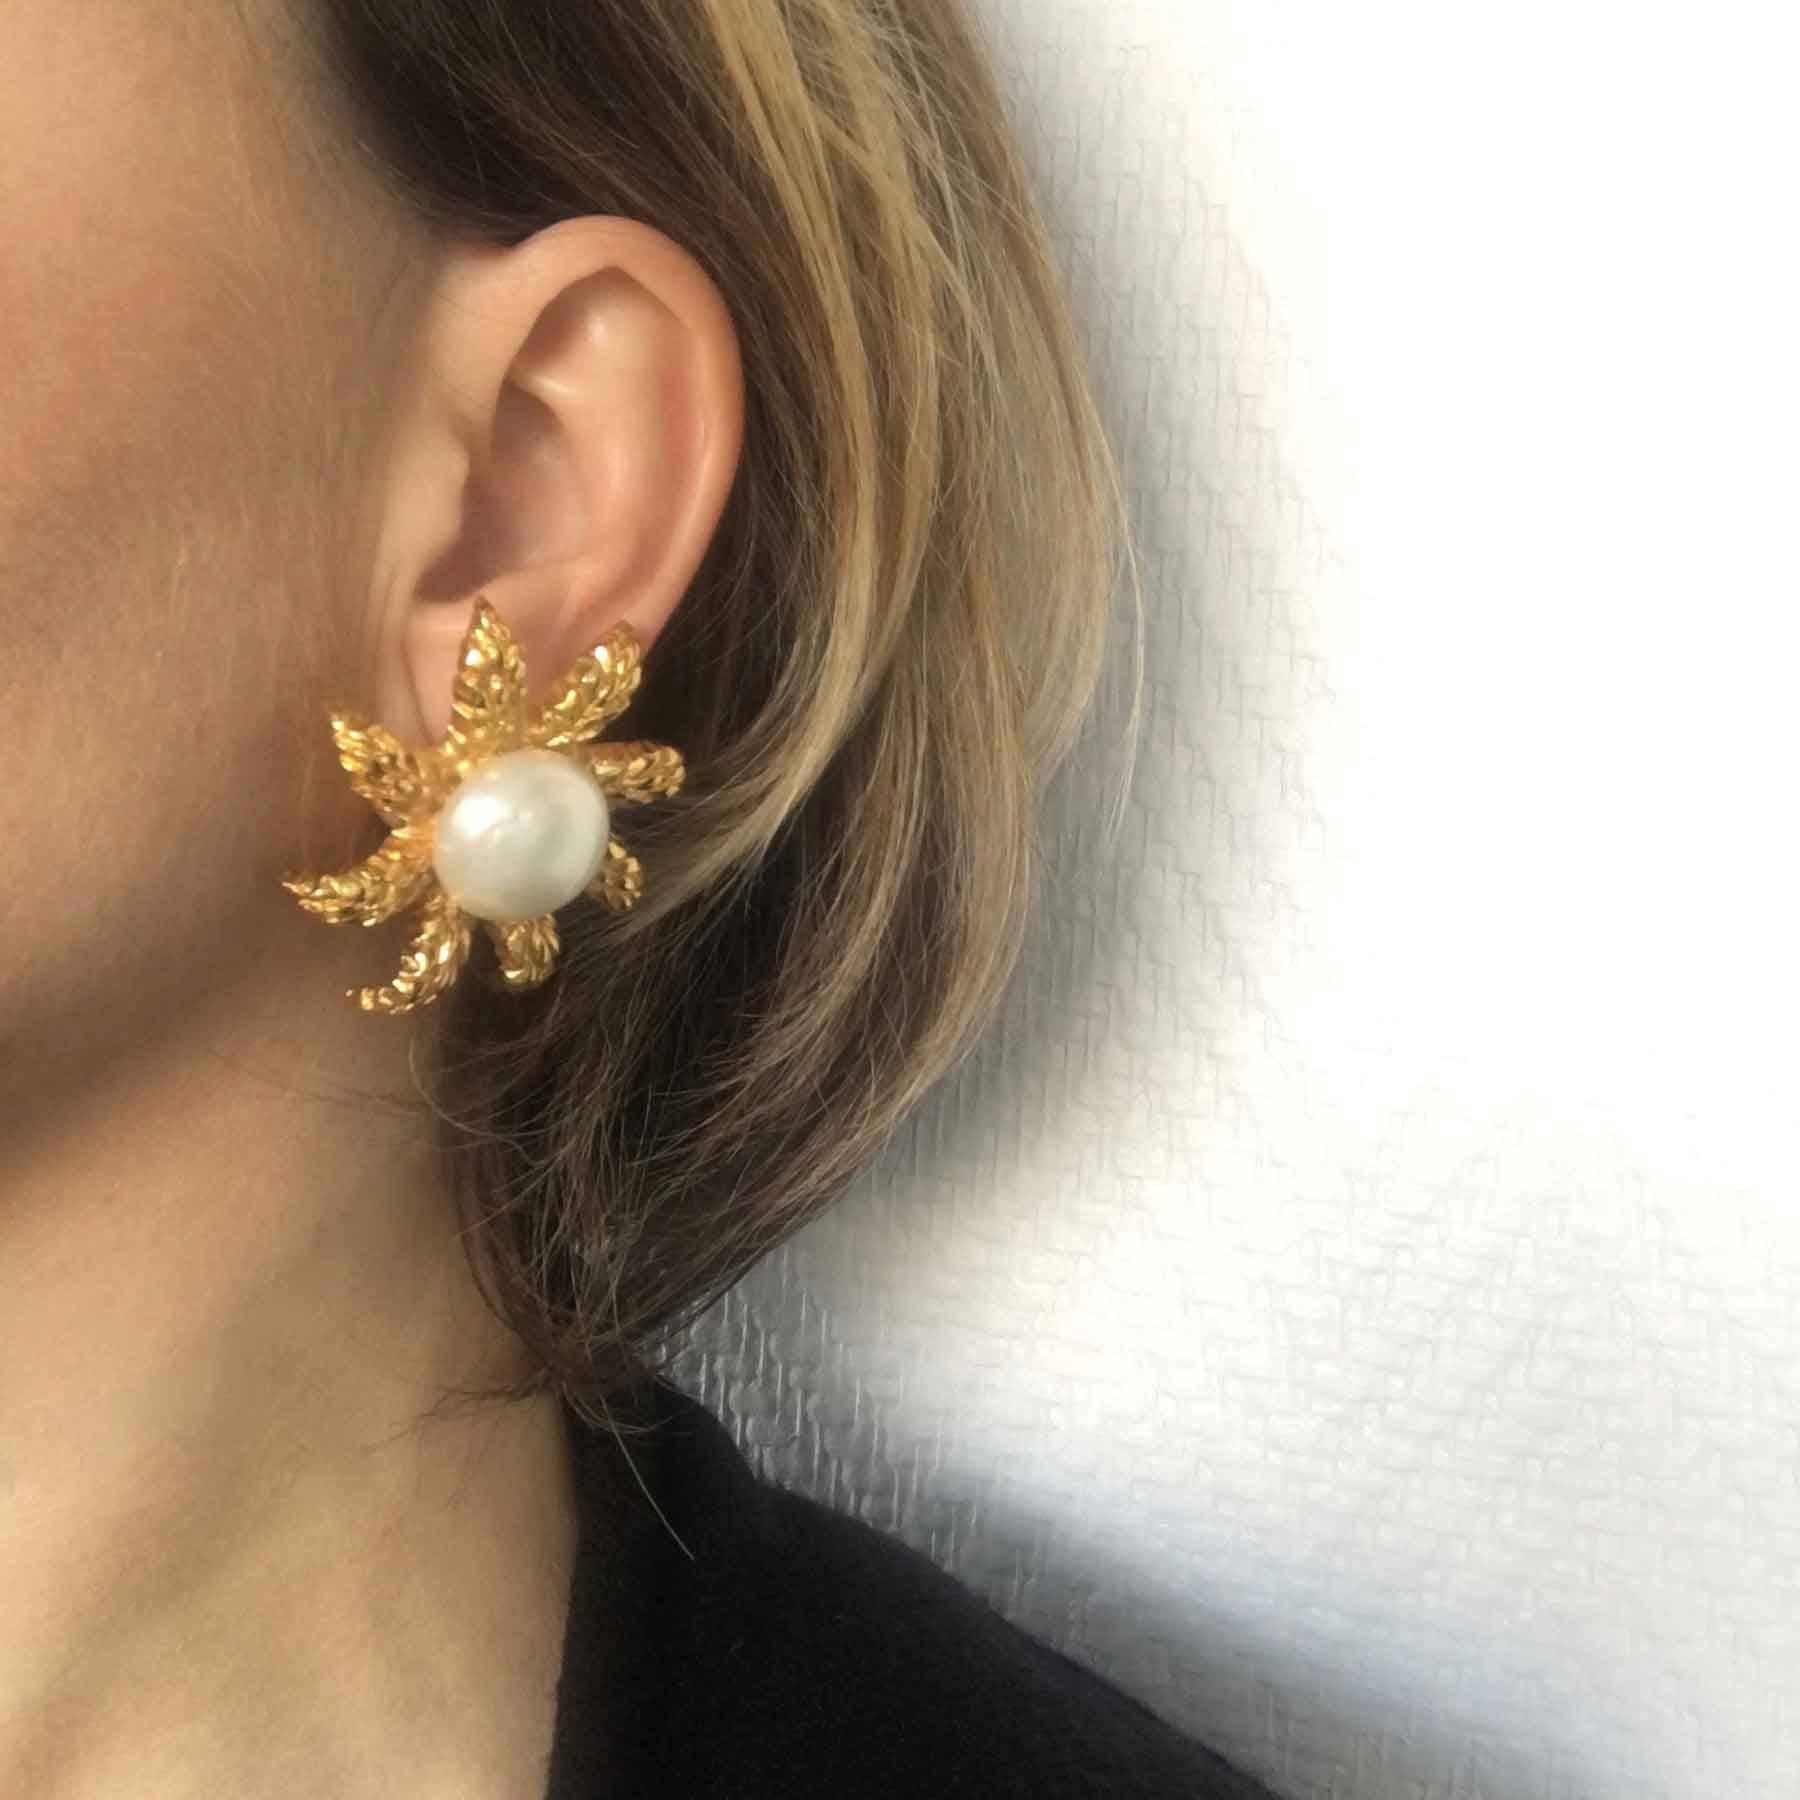 Stunning Collector Chanel clip-on earrings wheat ears crown in gilt metal with a beautiful glass pearl in the center. CHANEL engraved on the back of each earclip.

In FAIR condition. A clip was soldered to the back of the buckle (visible in the